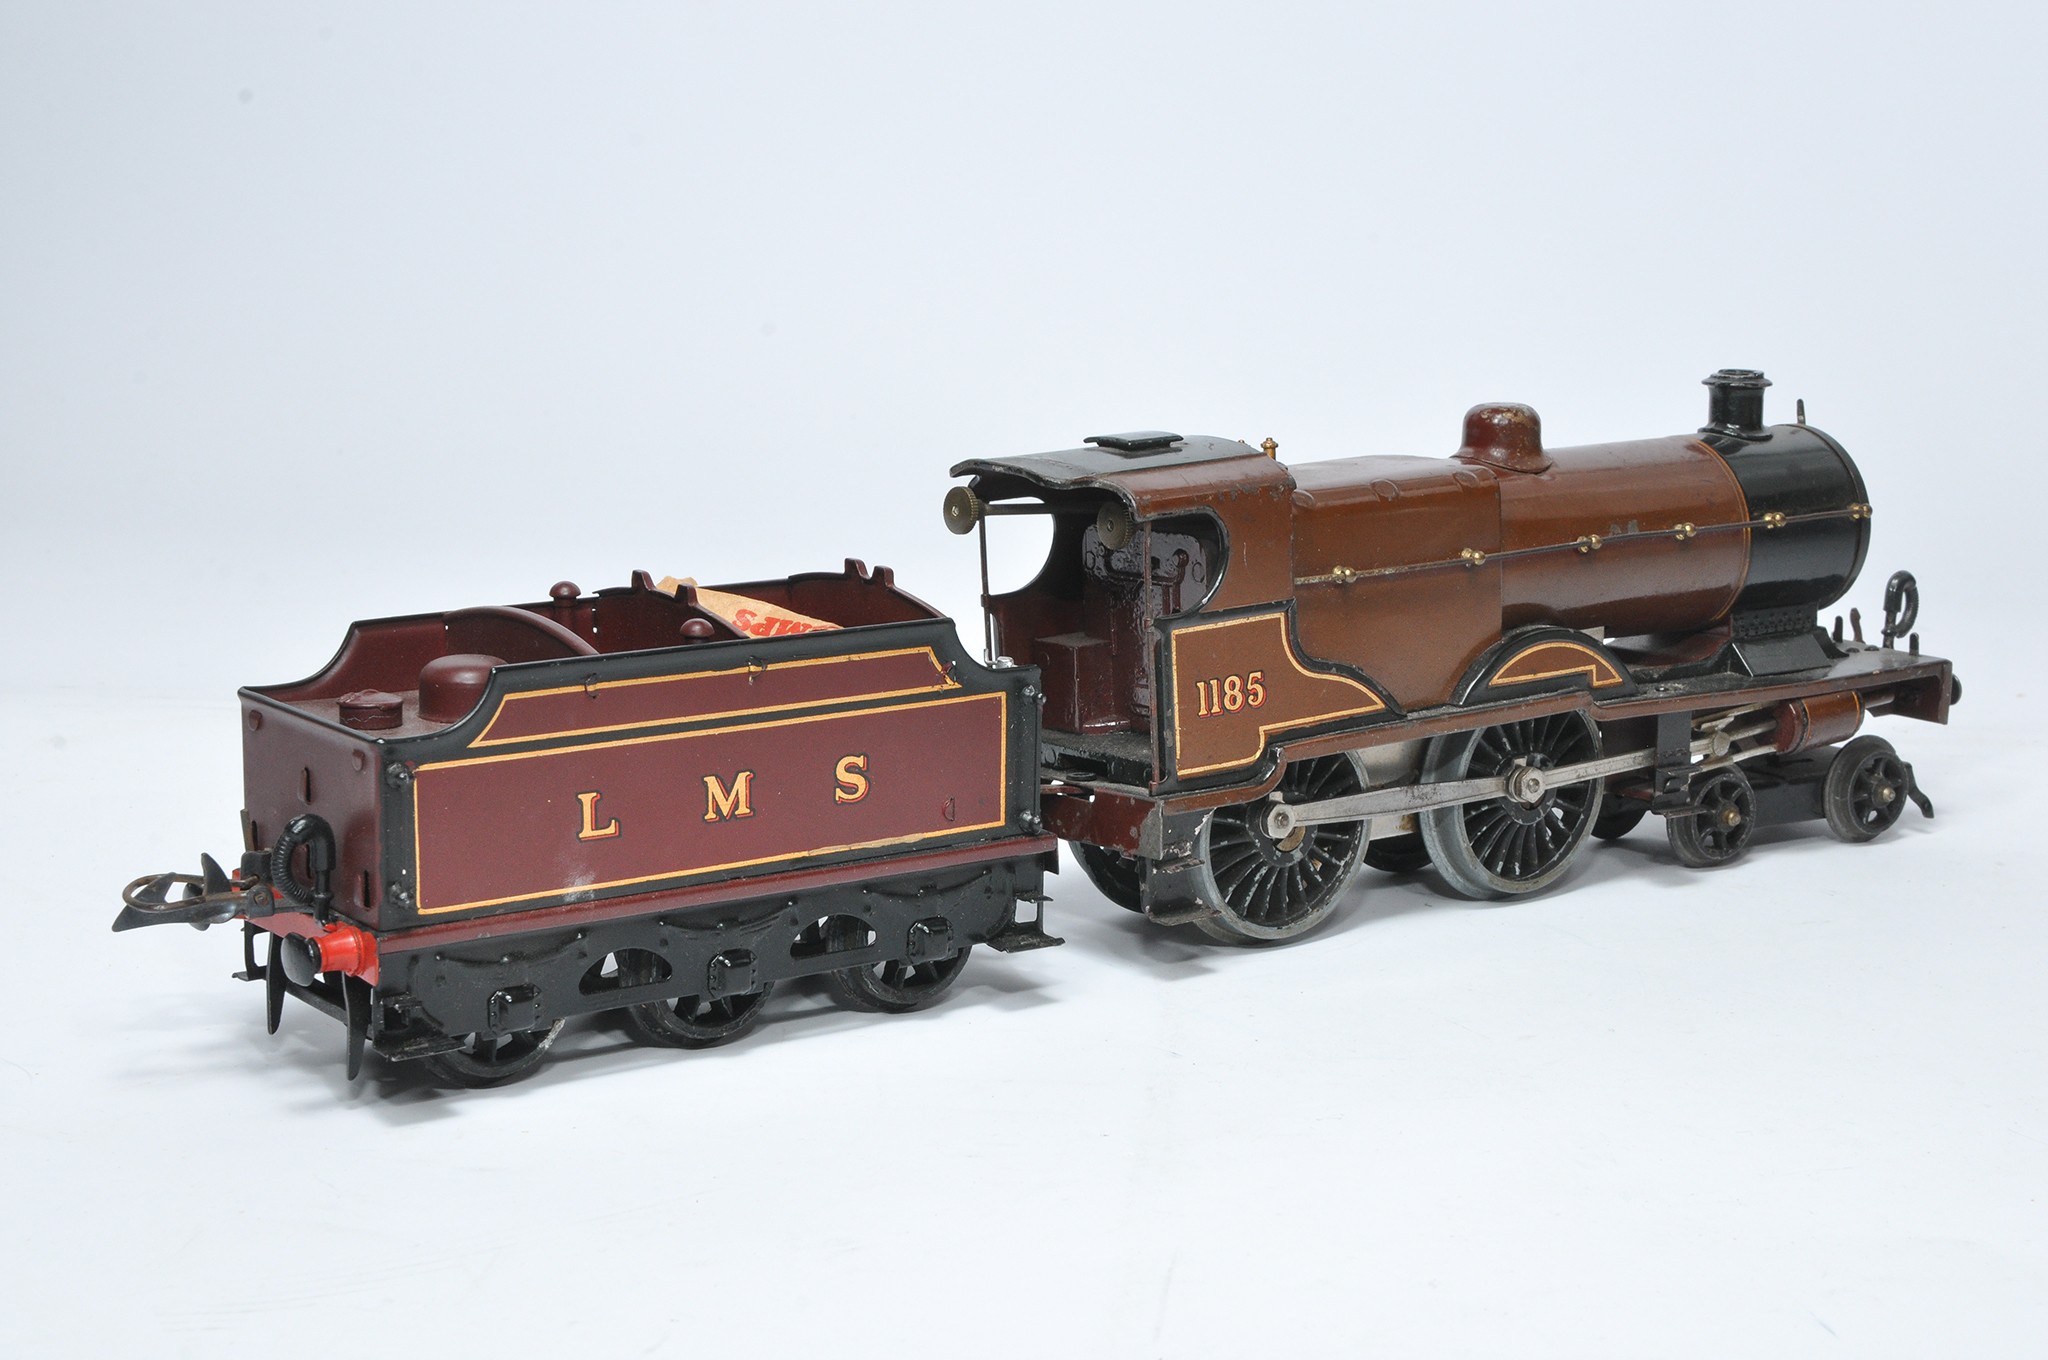 Hornby O Gauge Model Railway issue comprising E220 Special Locomotive LMS 1185 with tender ( - Image 2 of 2